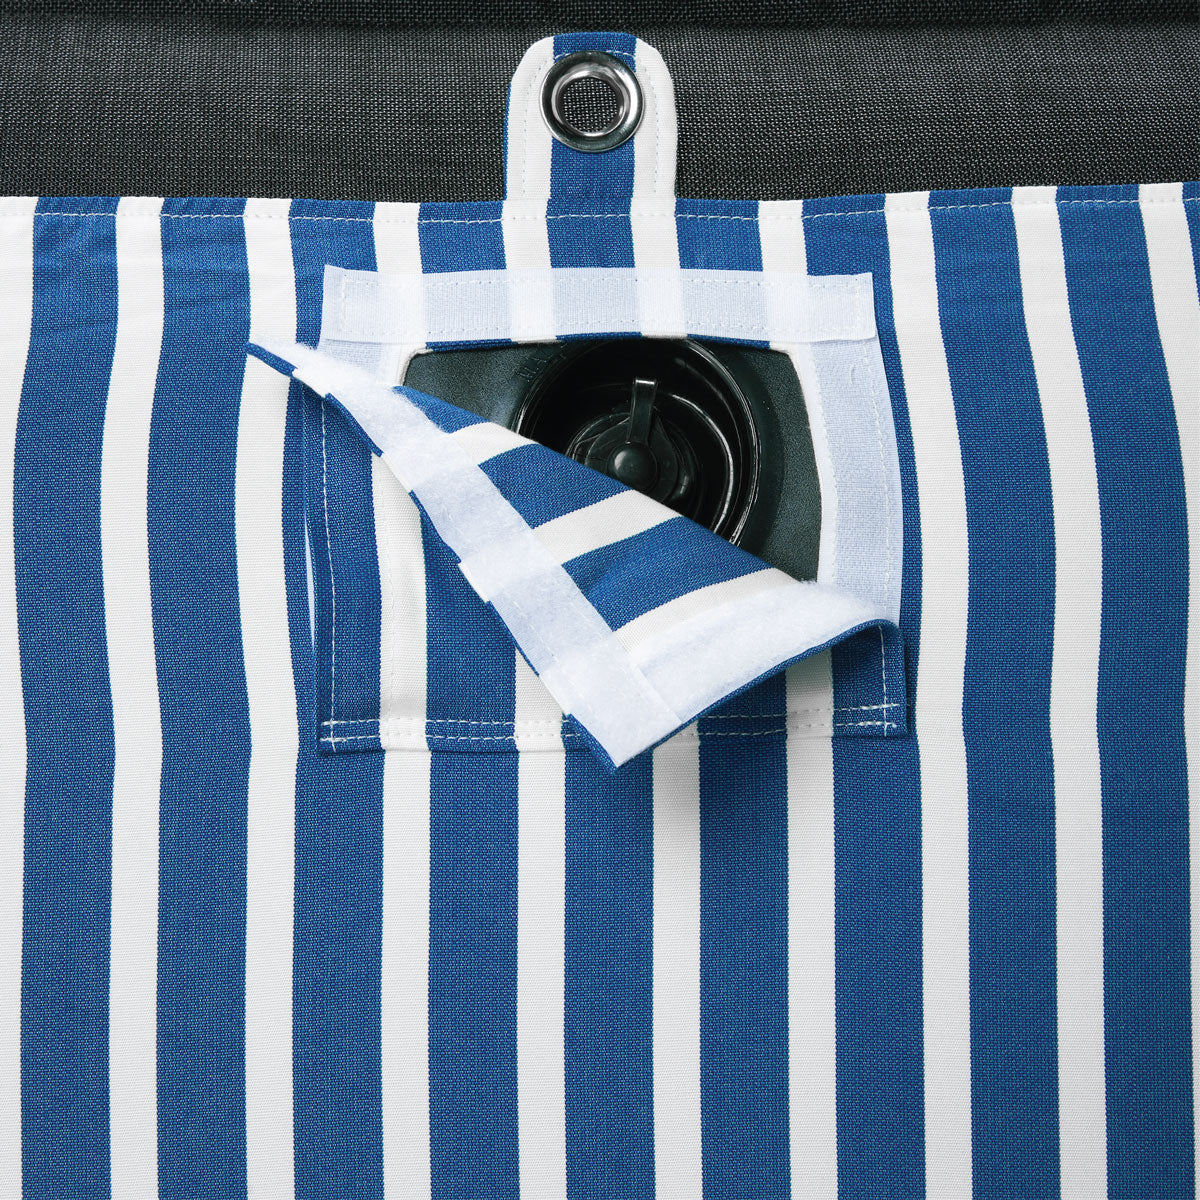 A pool float for an adult in a blue and white stripe fabric upside down with a eyelet and velcro window showing a boston valve.  